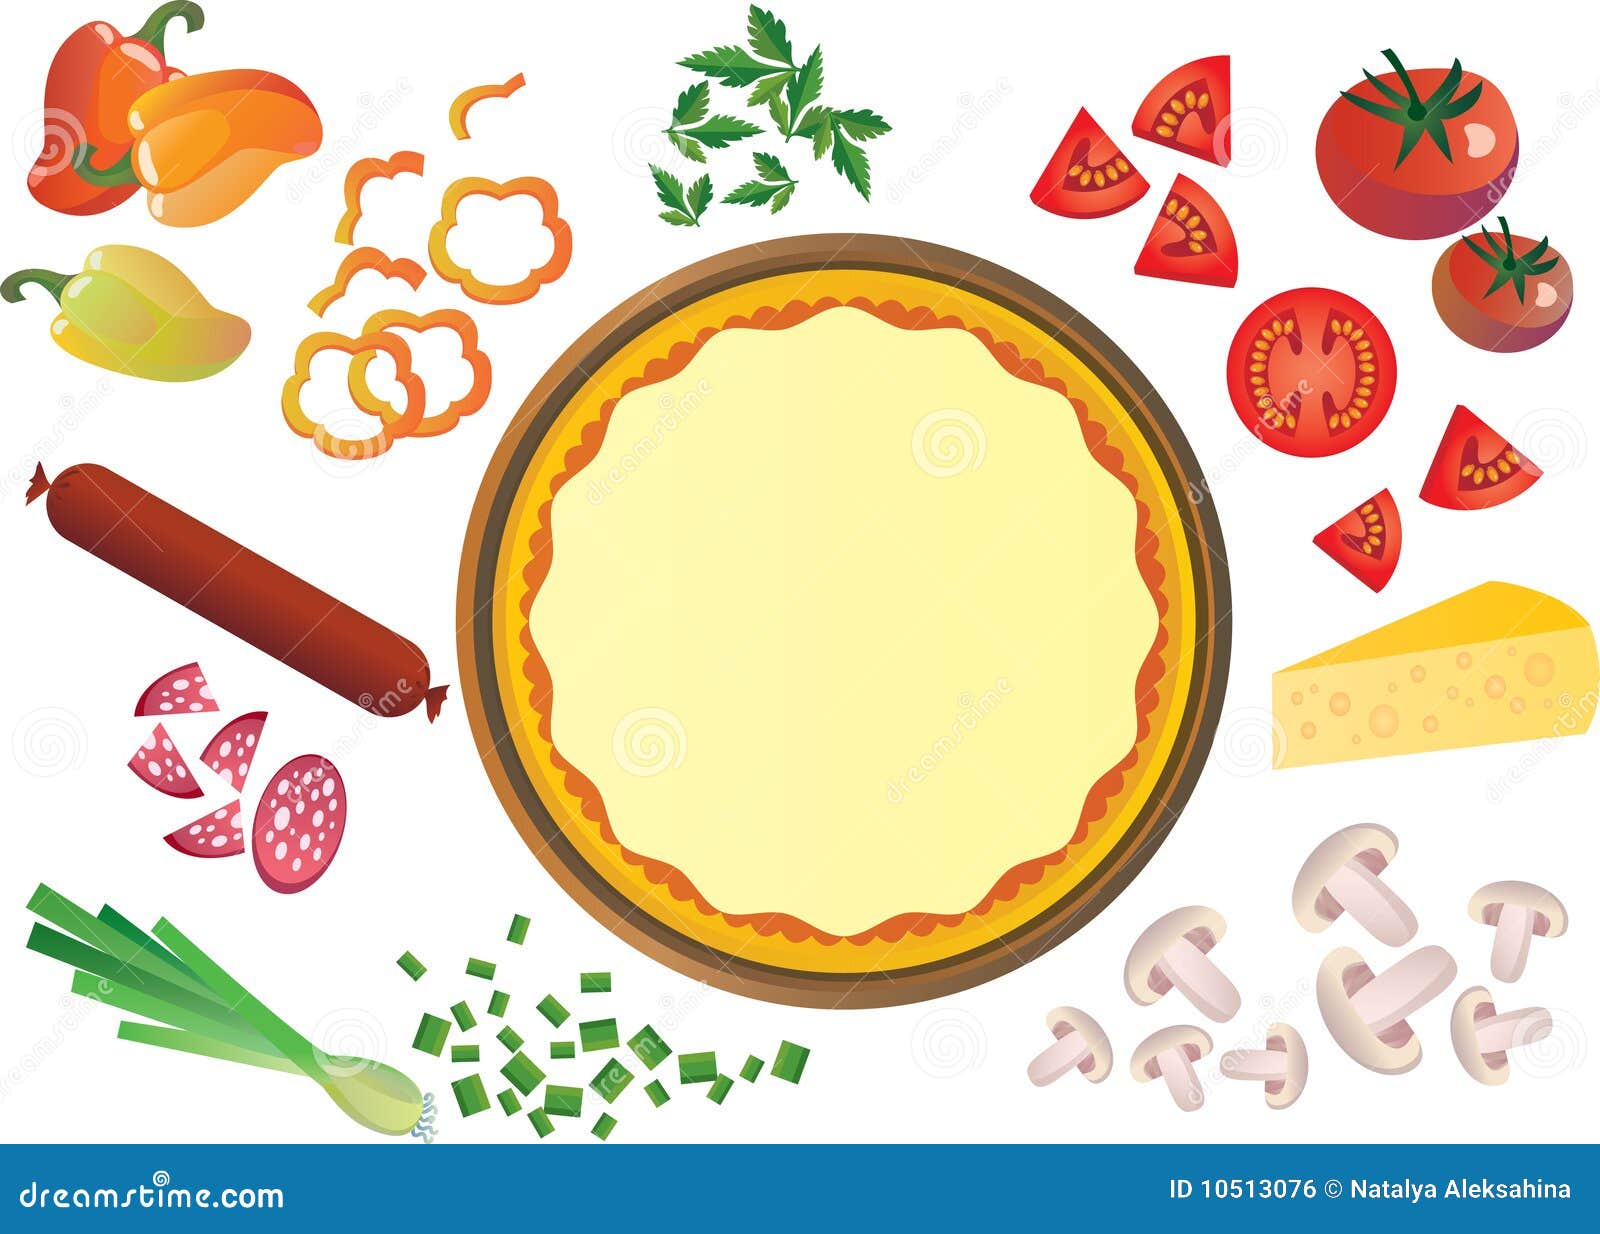 clipart pizza toppings - photo #16